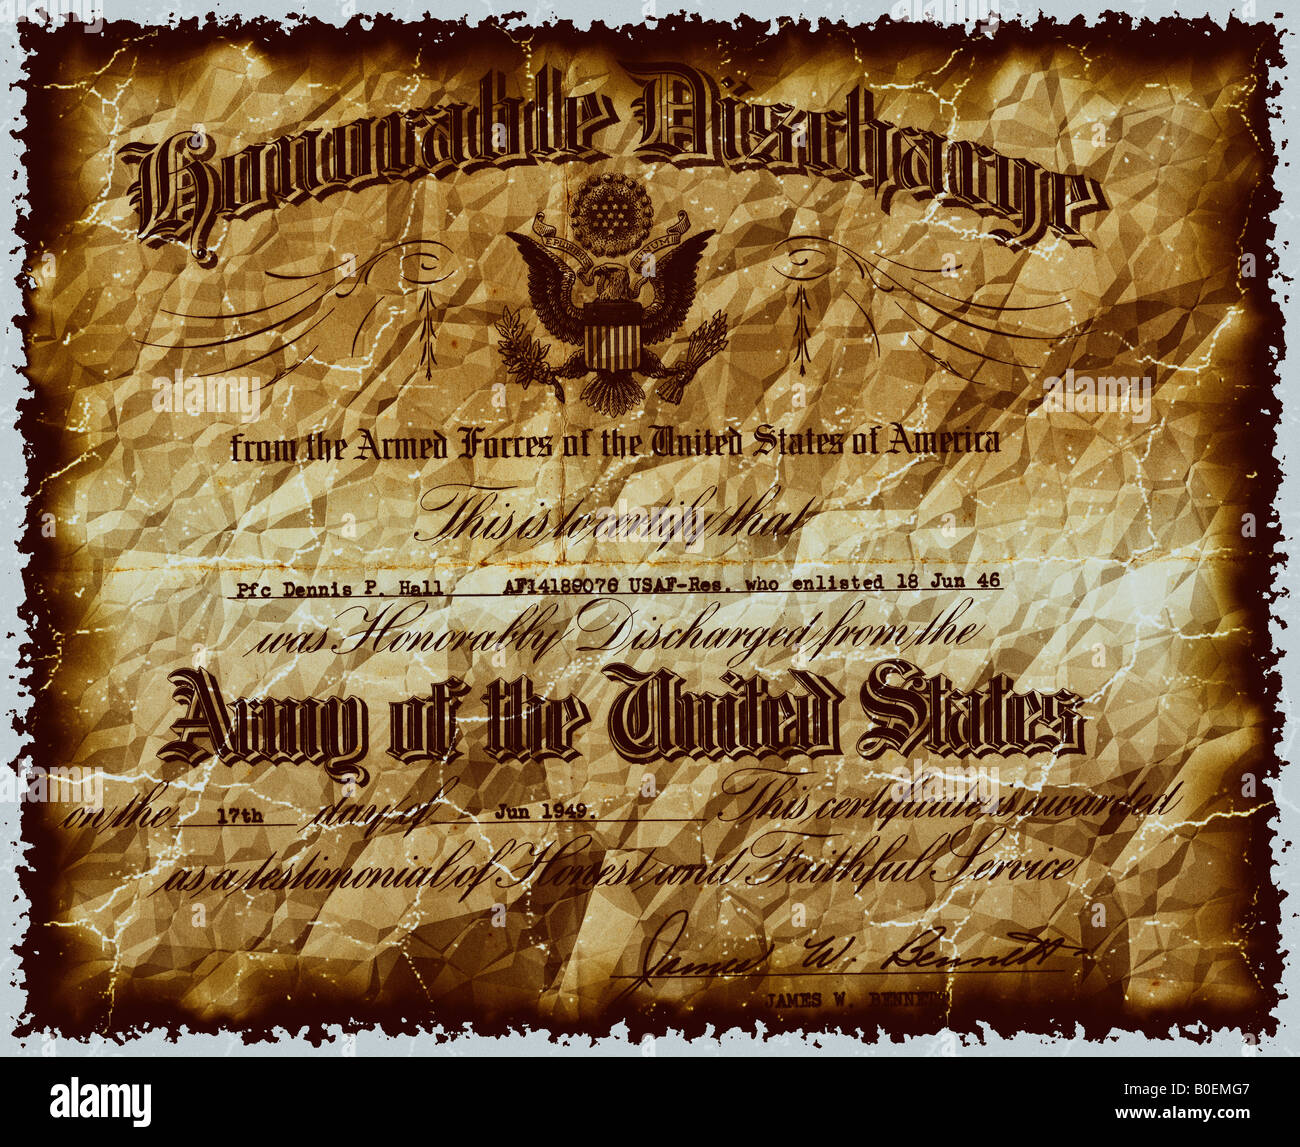 United States Army Honorable Discharge document recovered from house fire Stock Photo